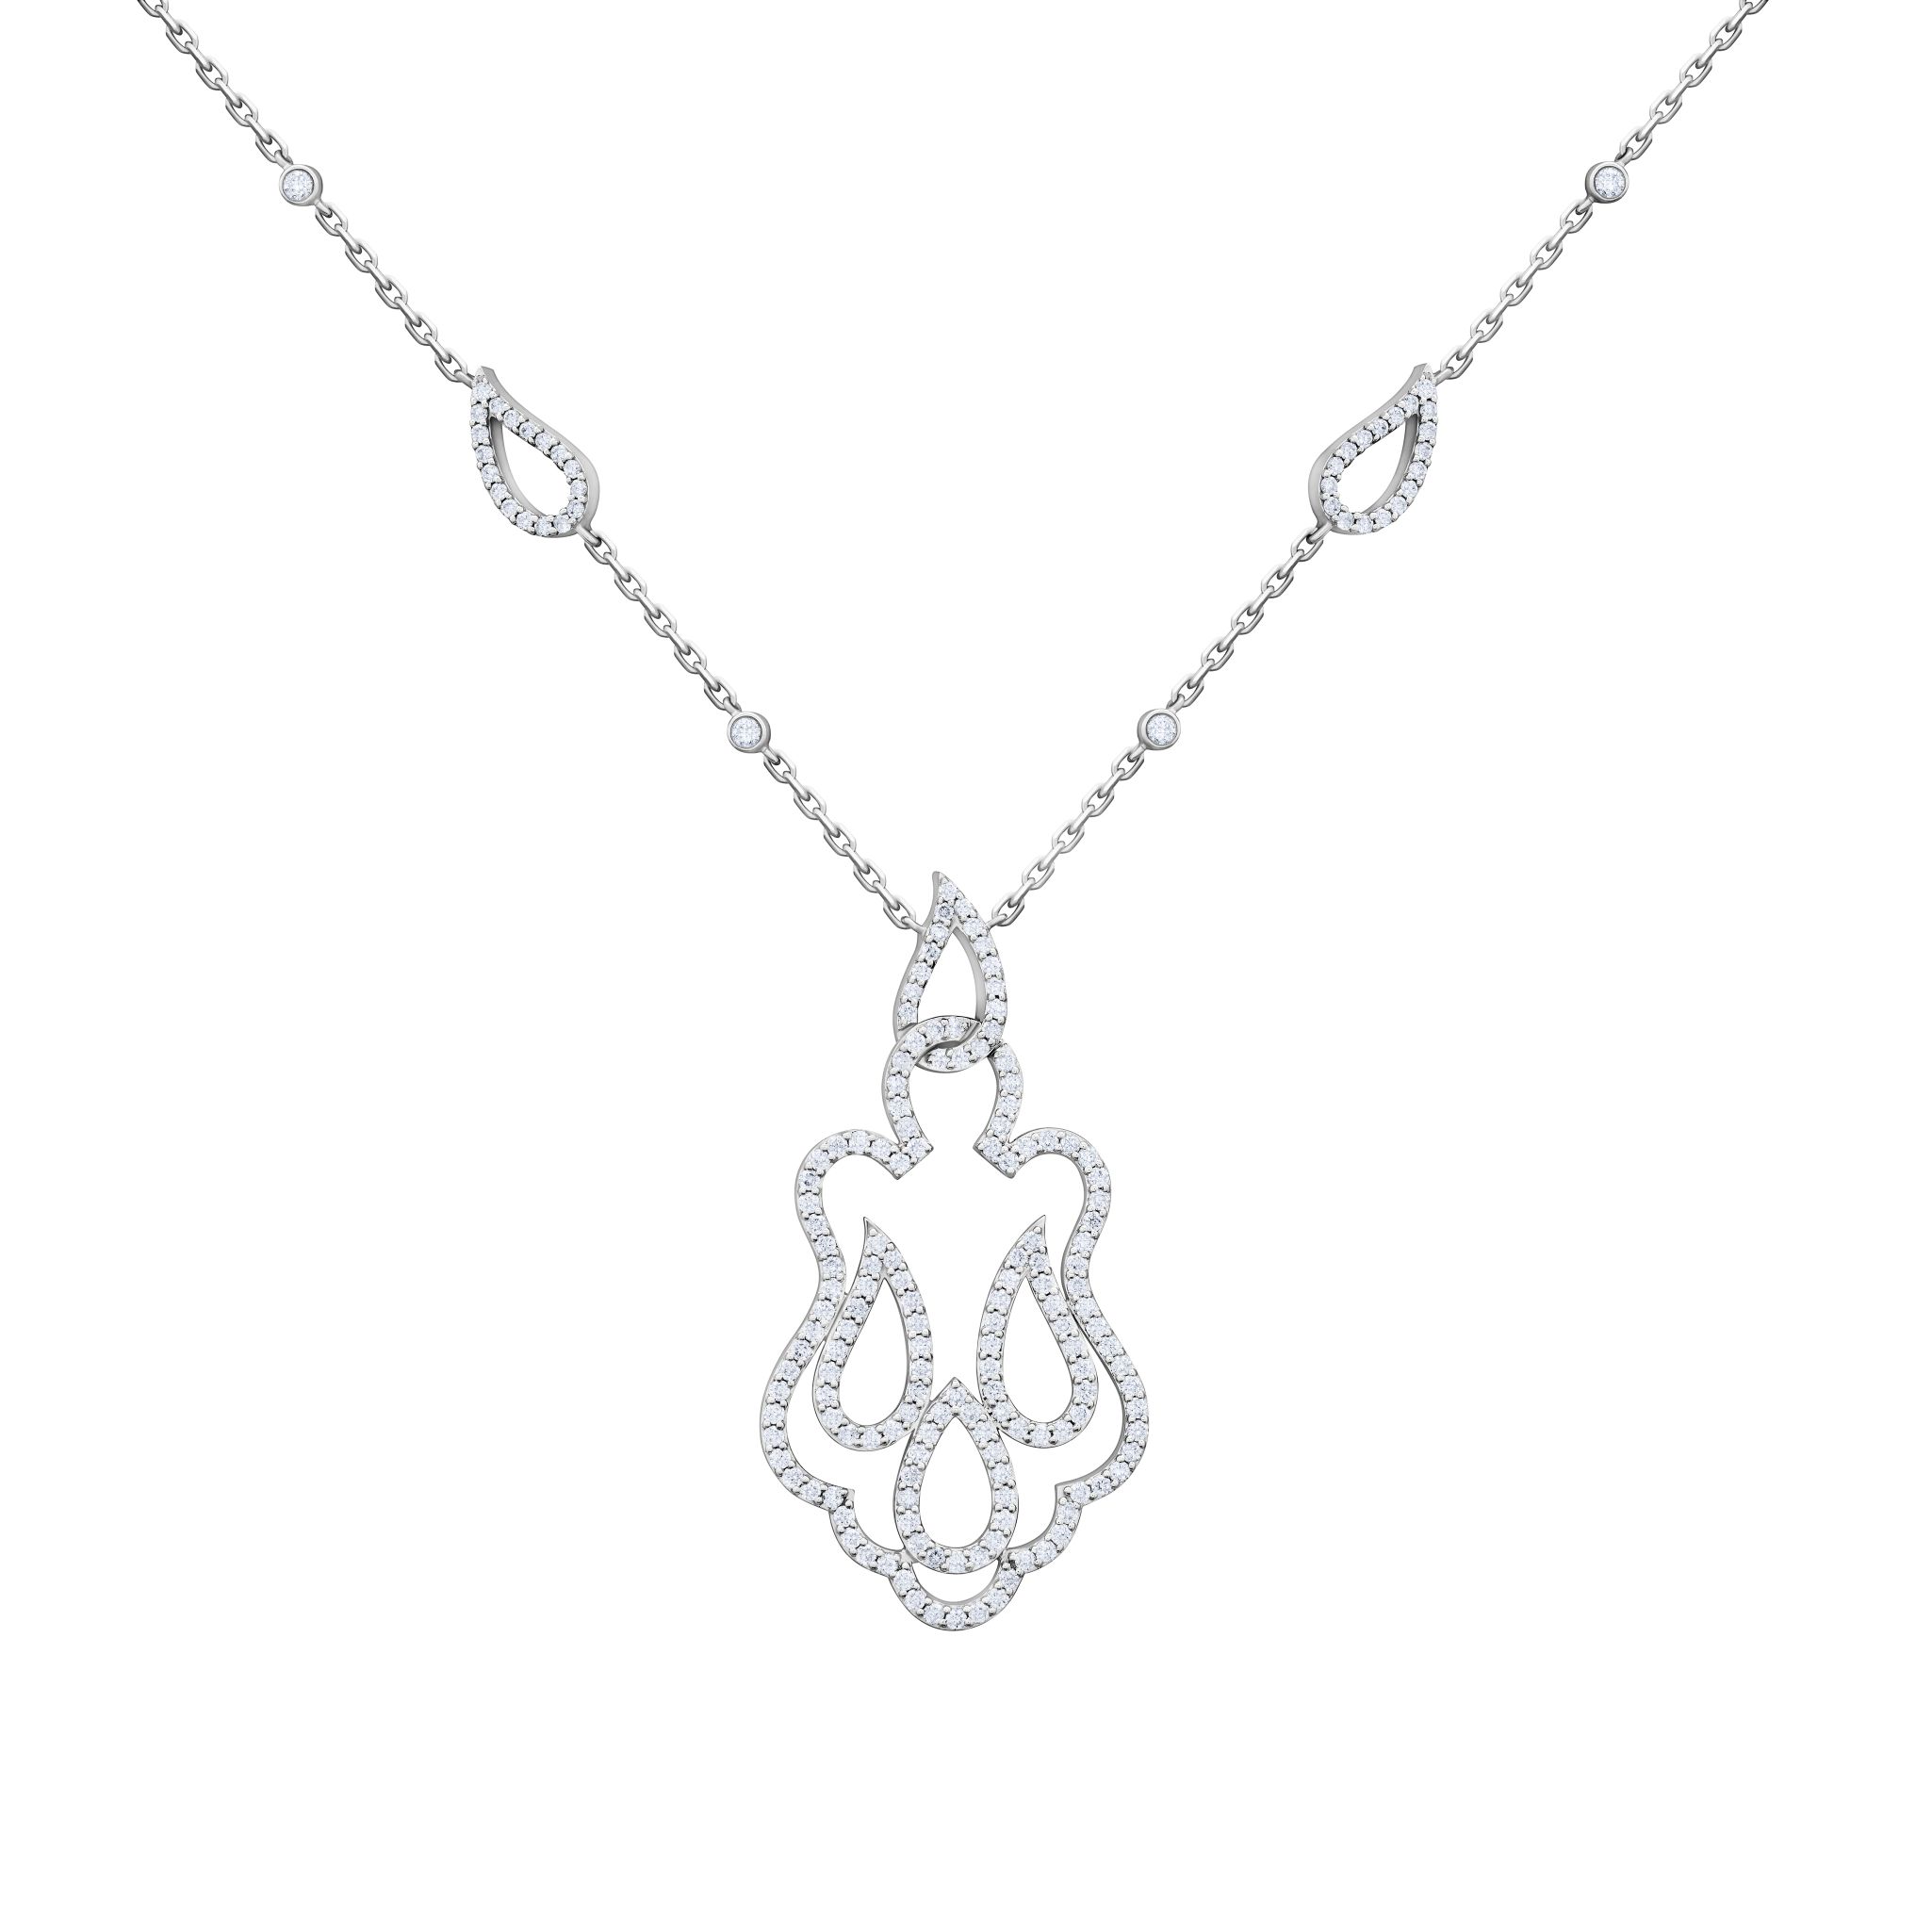 Asala White Gold and Diamond Necklace